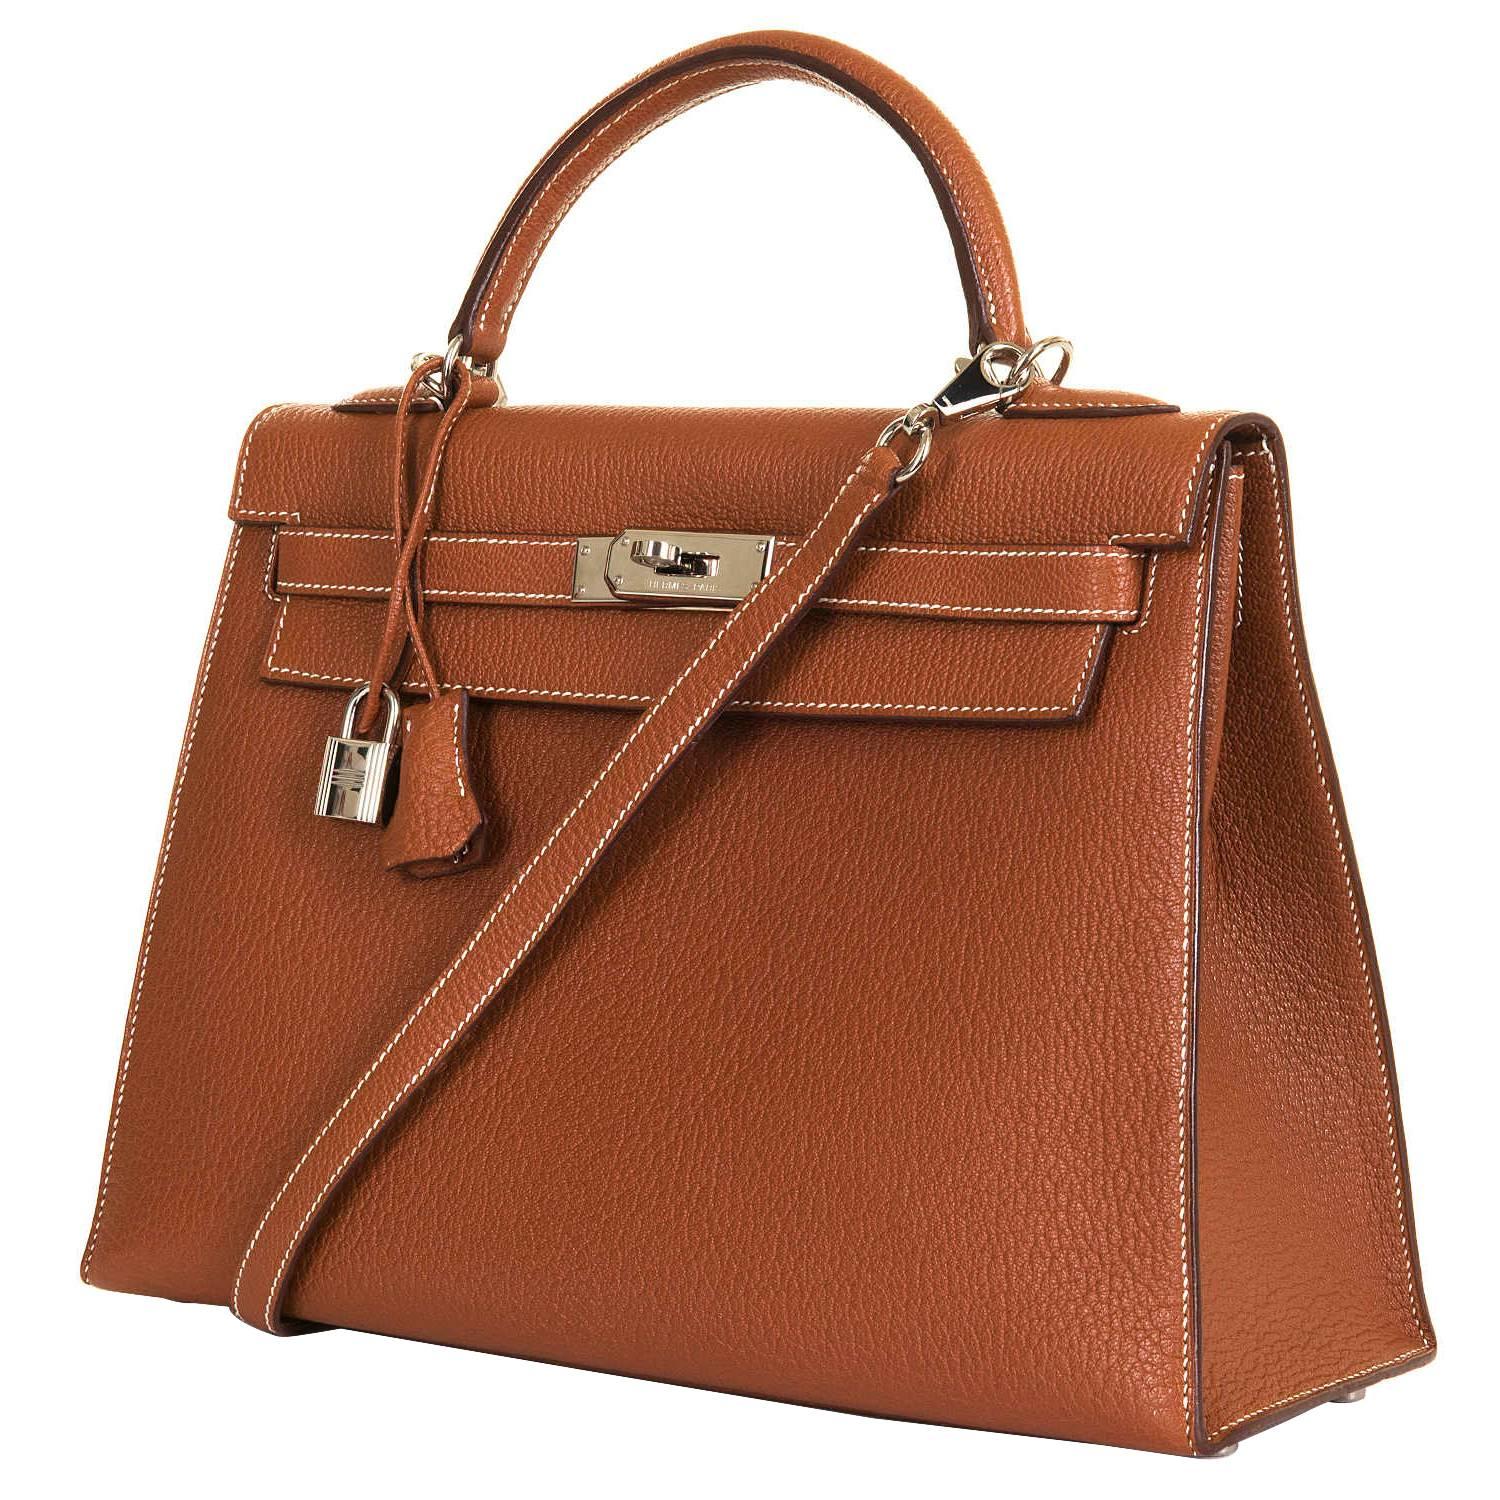 As New Pristine Hermes 32cm Kelly Sellier Bag in 'Rouille' Clemence Leather SHW